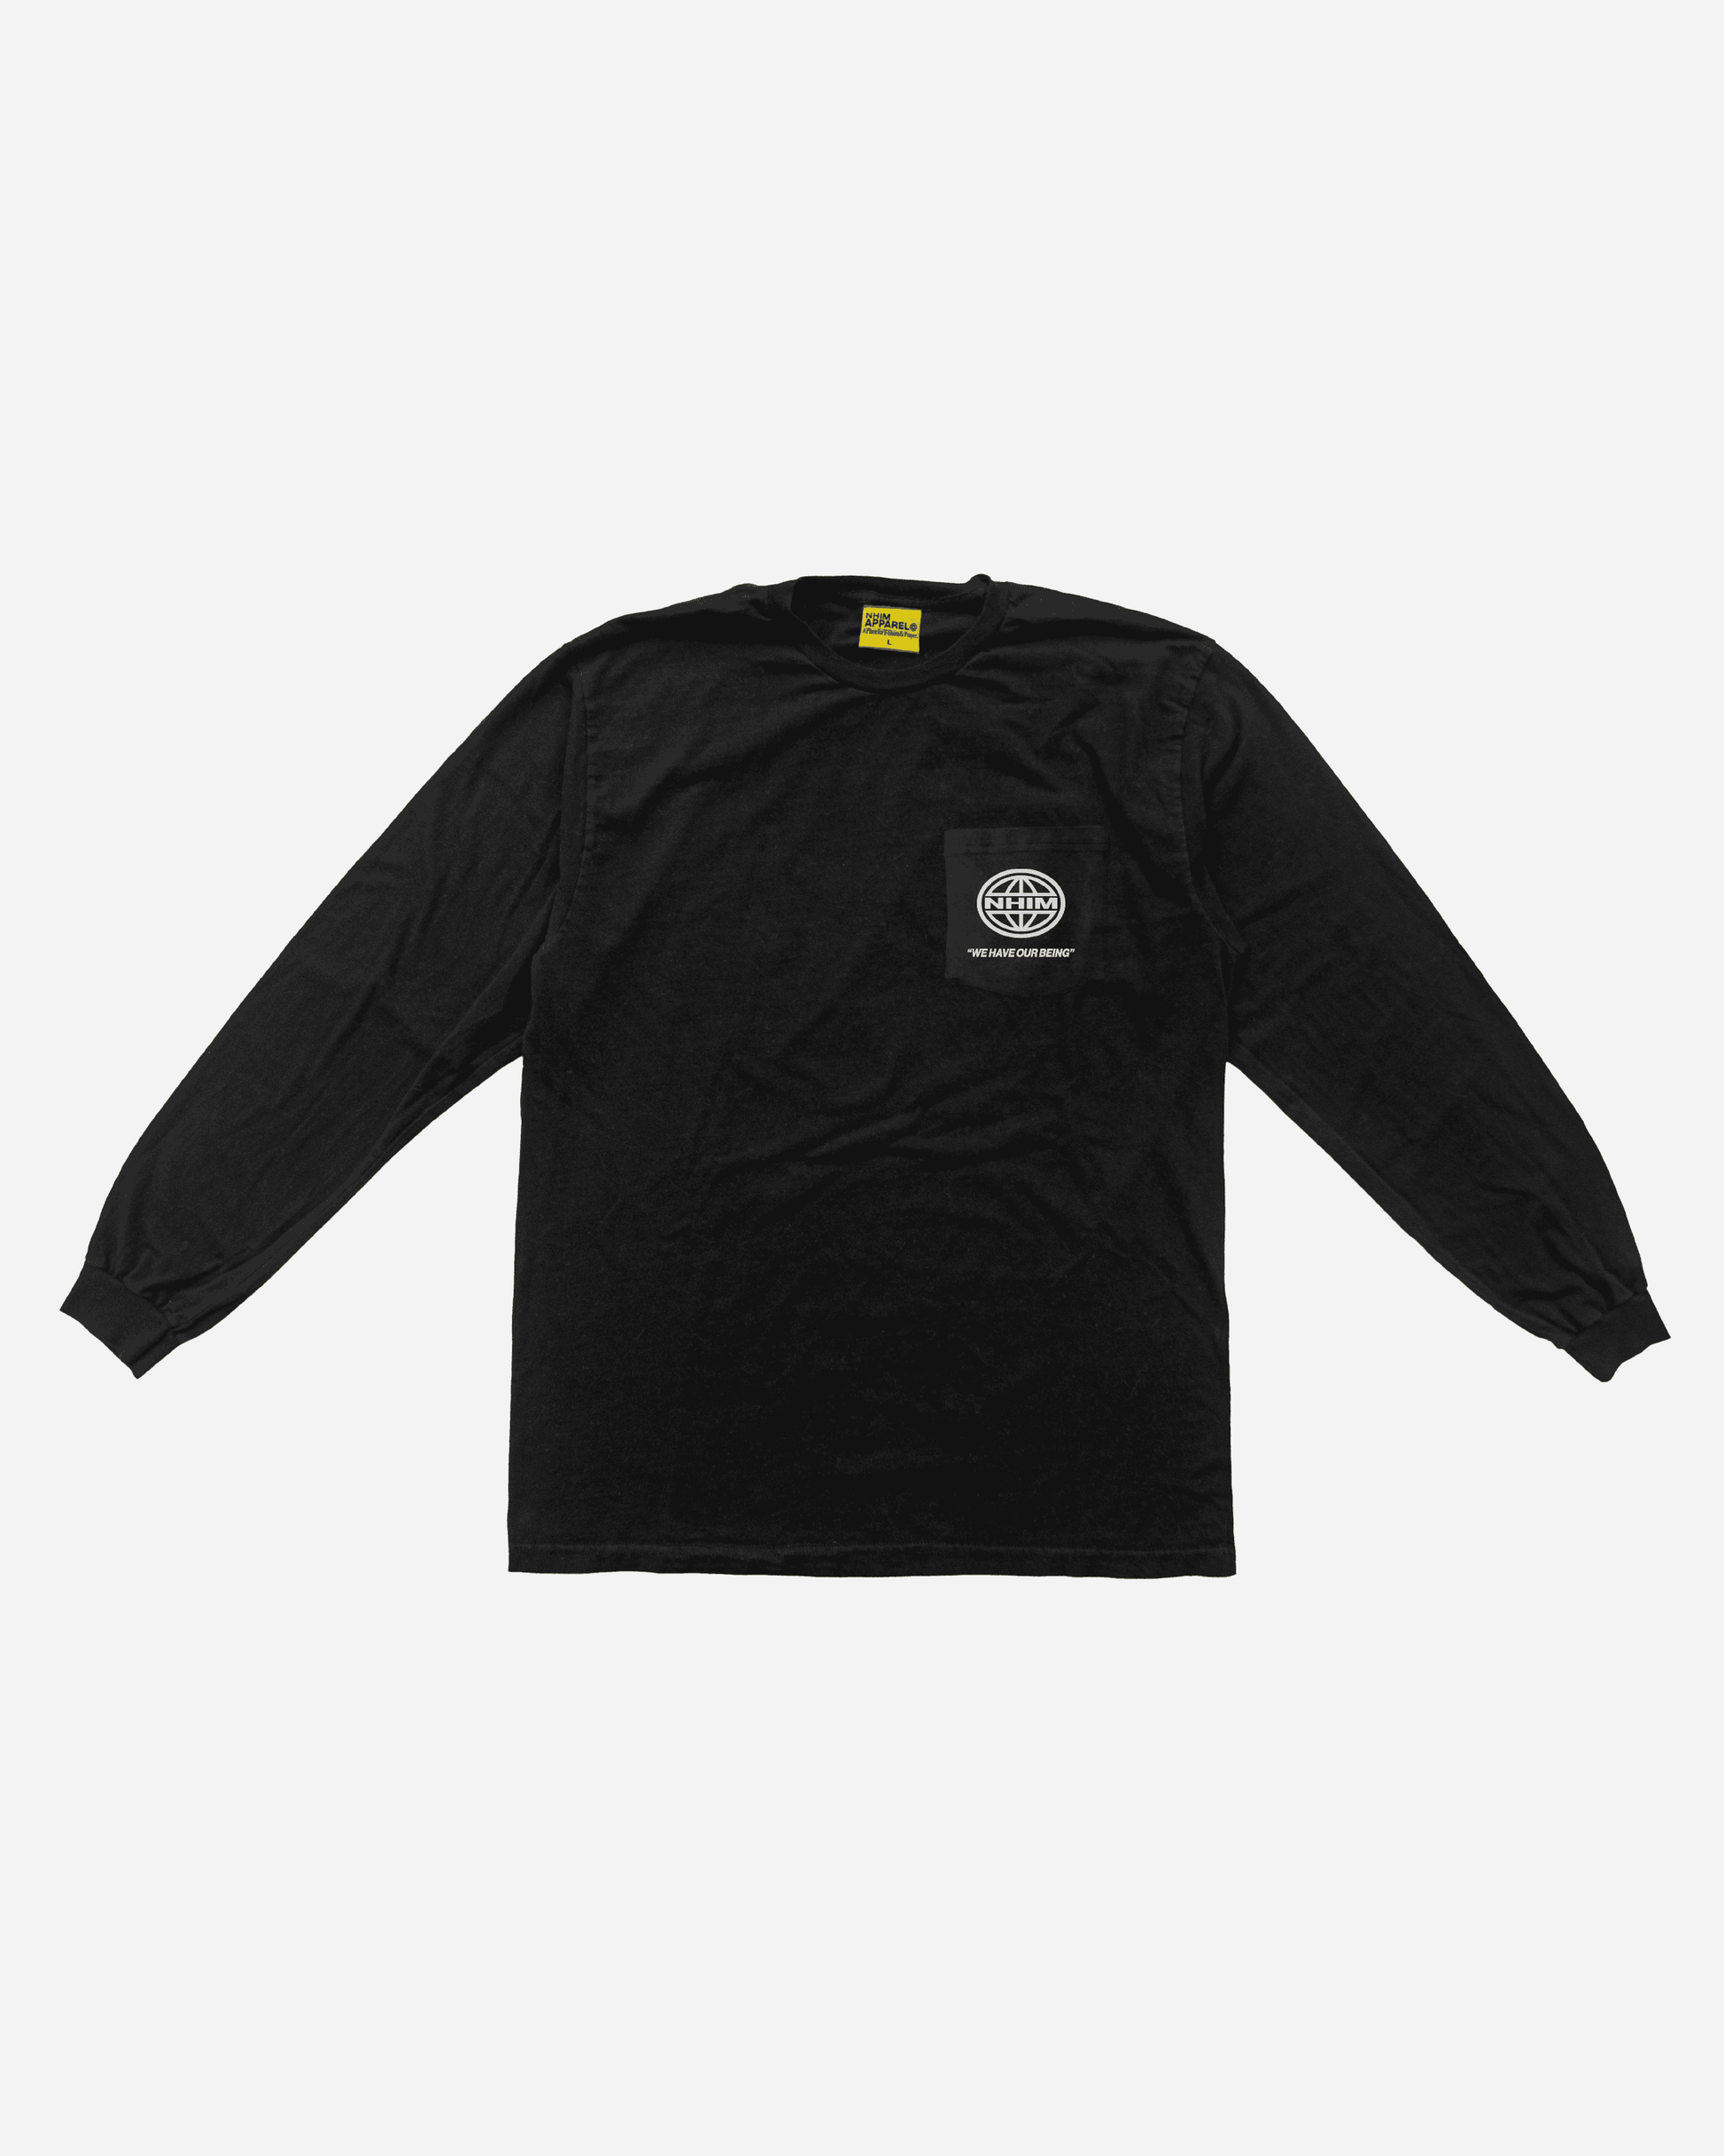 NHIM We have our being brand long sleeve tee in black by NHIM Apparel Christian clothing brand